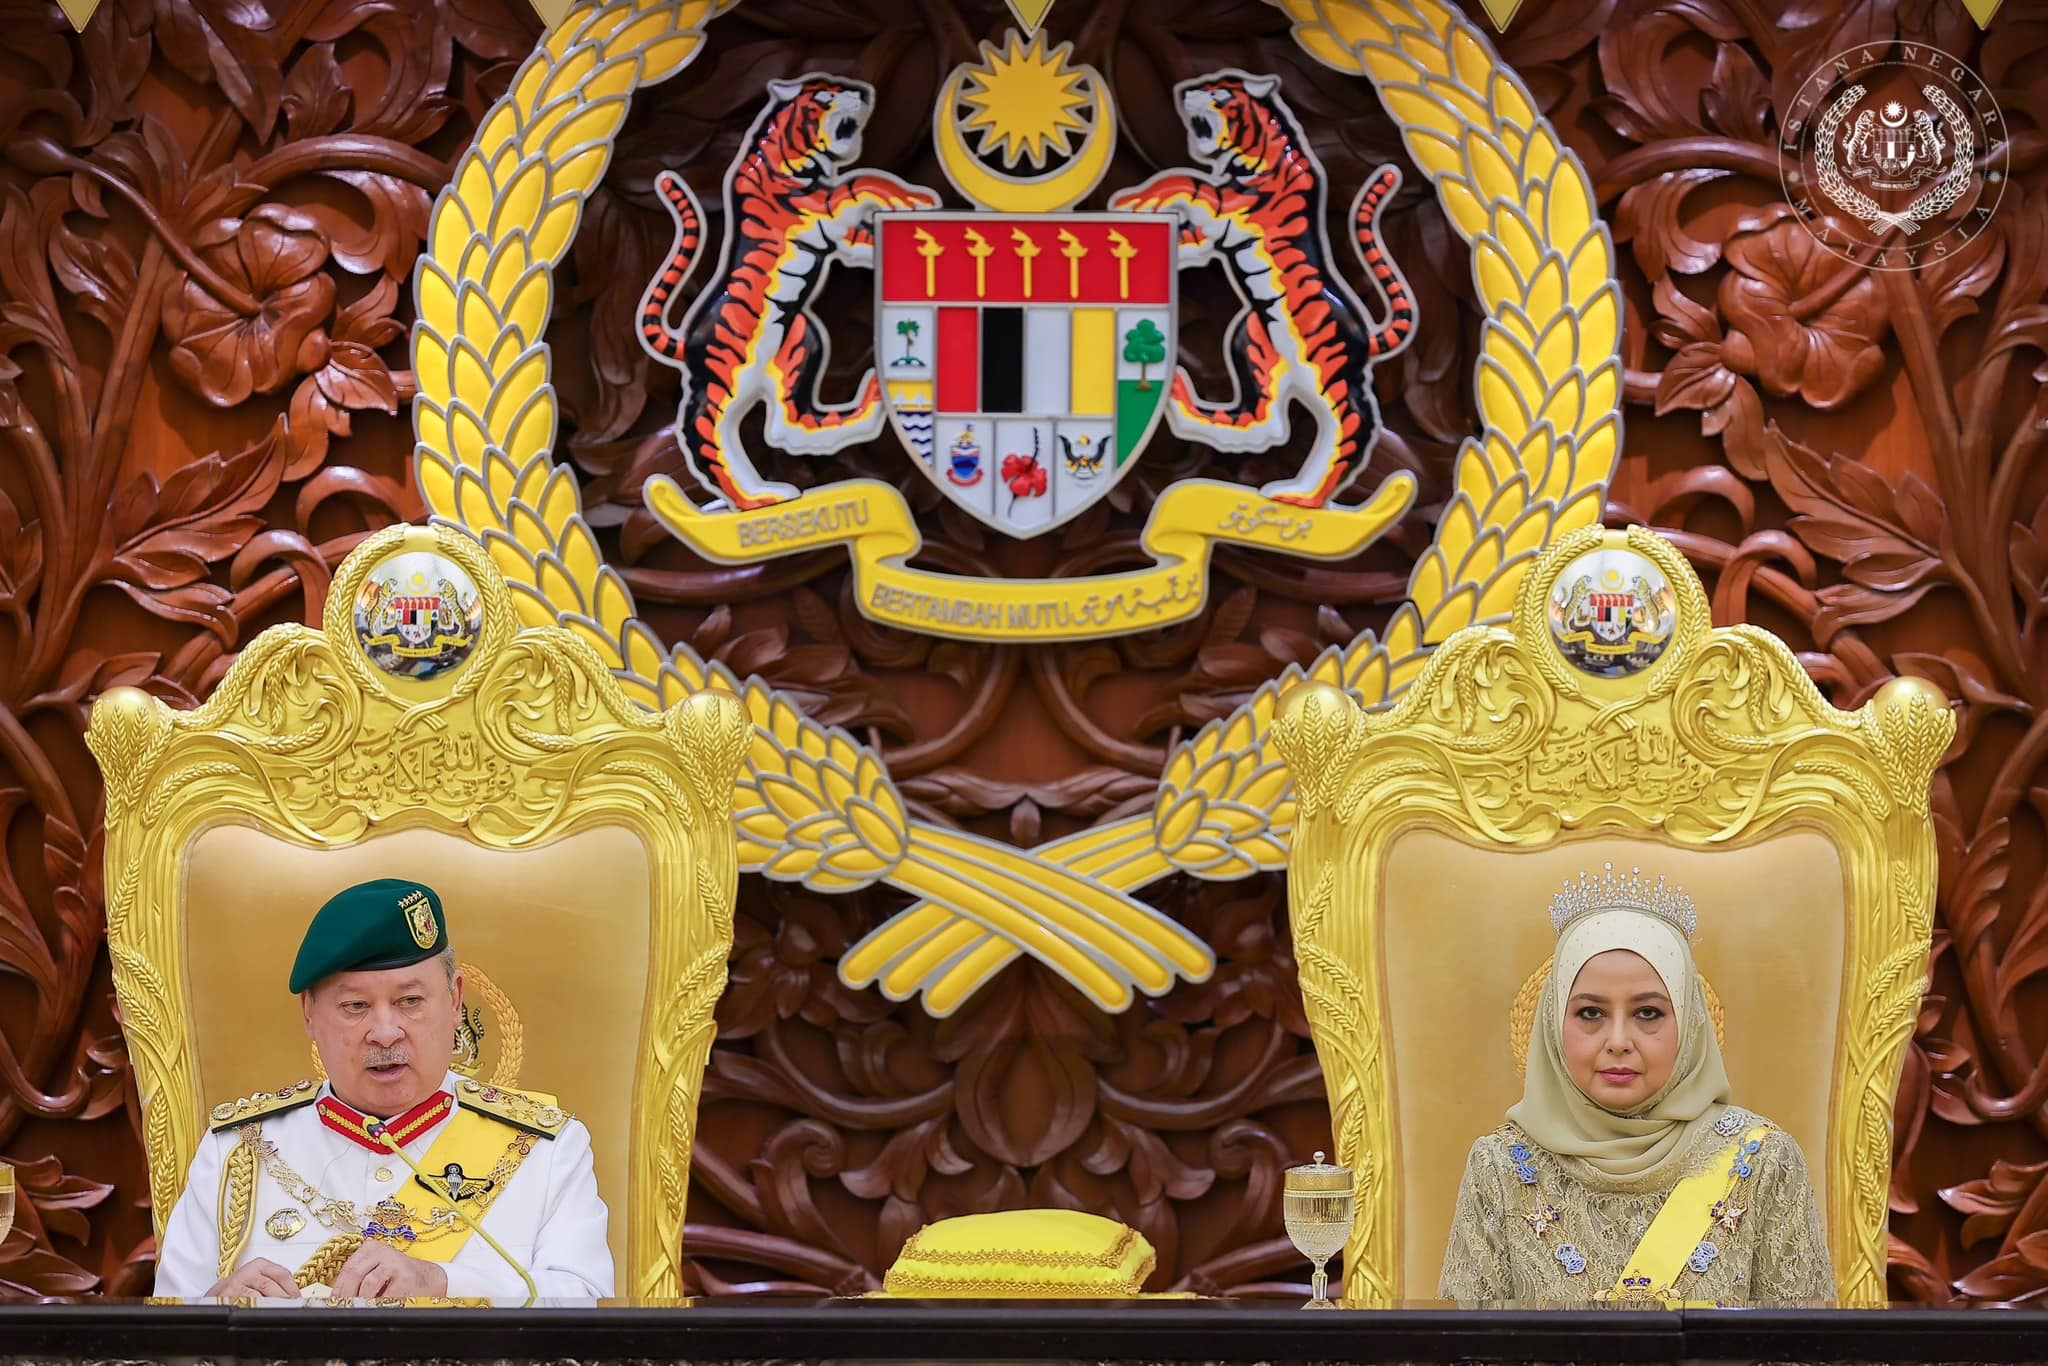 M'sian king sultan ibrahim and his wife